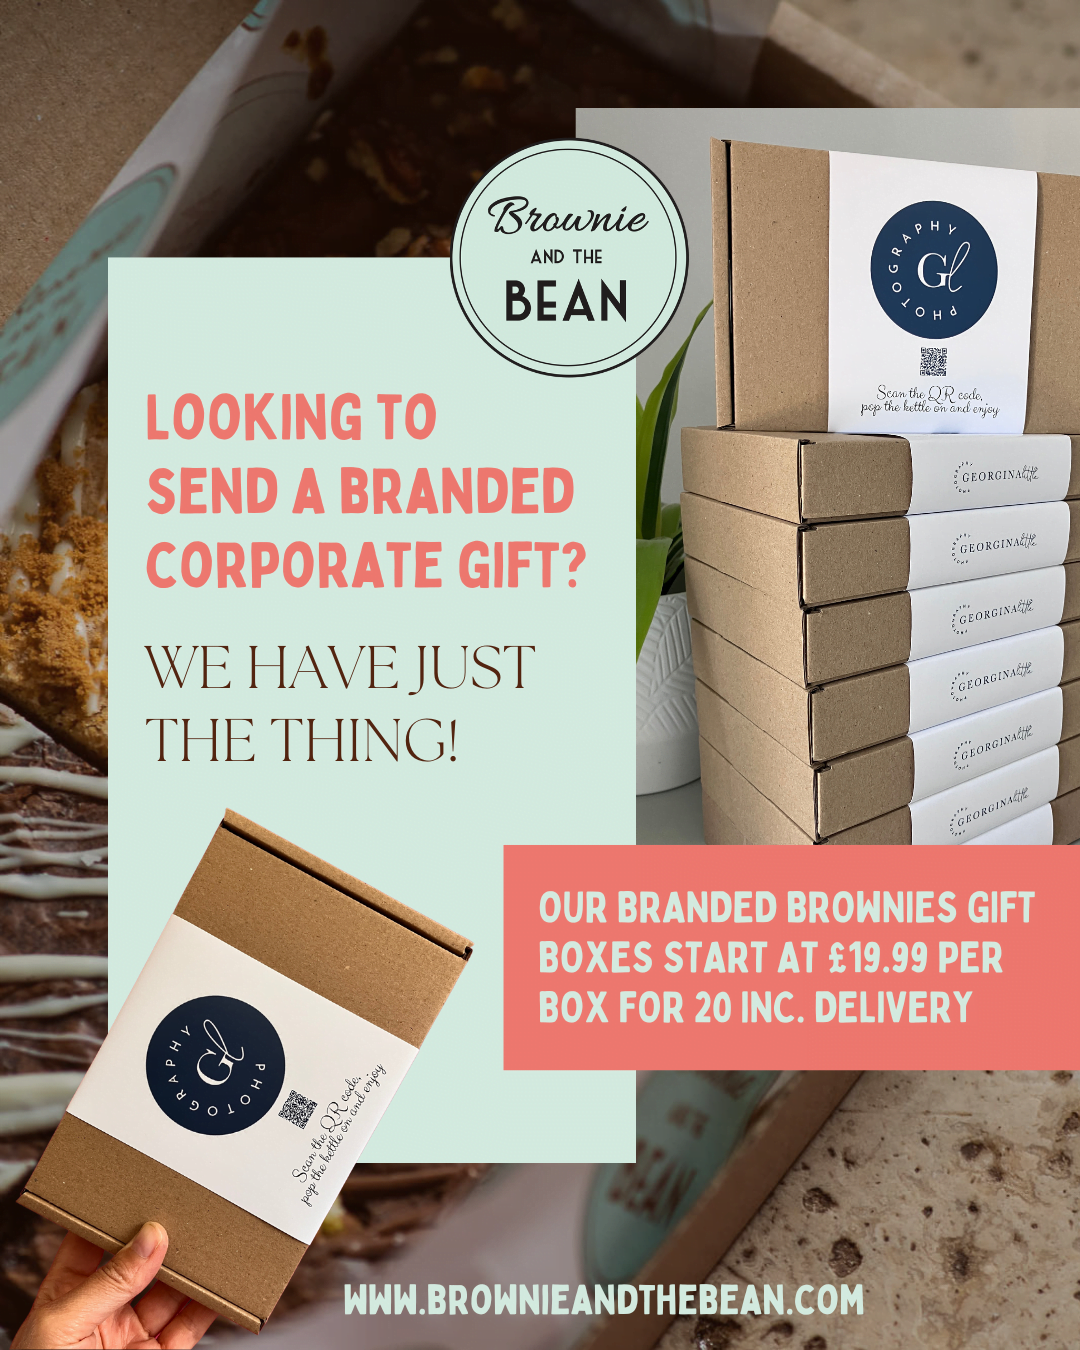 In the back left is an open box of chocolate brownies and blondies. On the right is a stack of brownie boxes with bespoke packaging. The boxes are made of Kraft and the packaging is white with a navy logo on it. There is some small writing to denote a brand. In the text it reads "looking to send a branded corporate gift? We have just the thing?" The Brownie and the Bean logo is in the top middle and there is text to the right saying "Our branded brownies gift boxes start at £19.99 per box for 20 inc. delivery". There is also a branded bespoke box being held up to the bottom left. The website address is at the bottom.